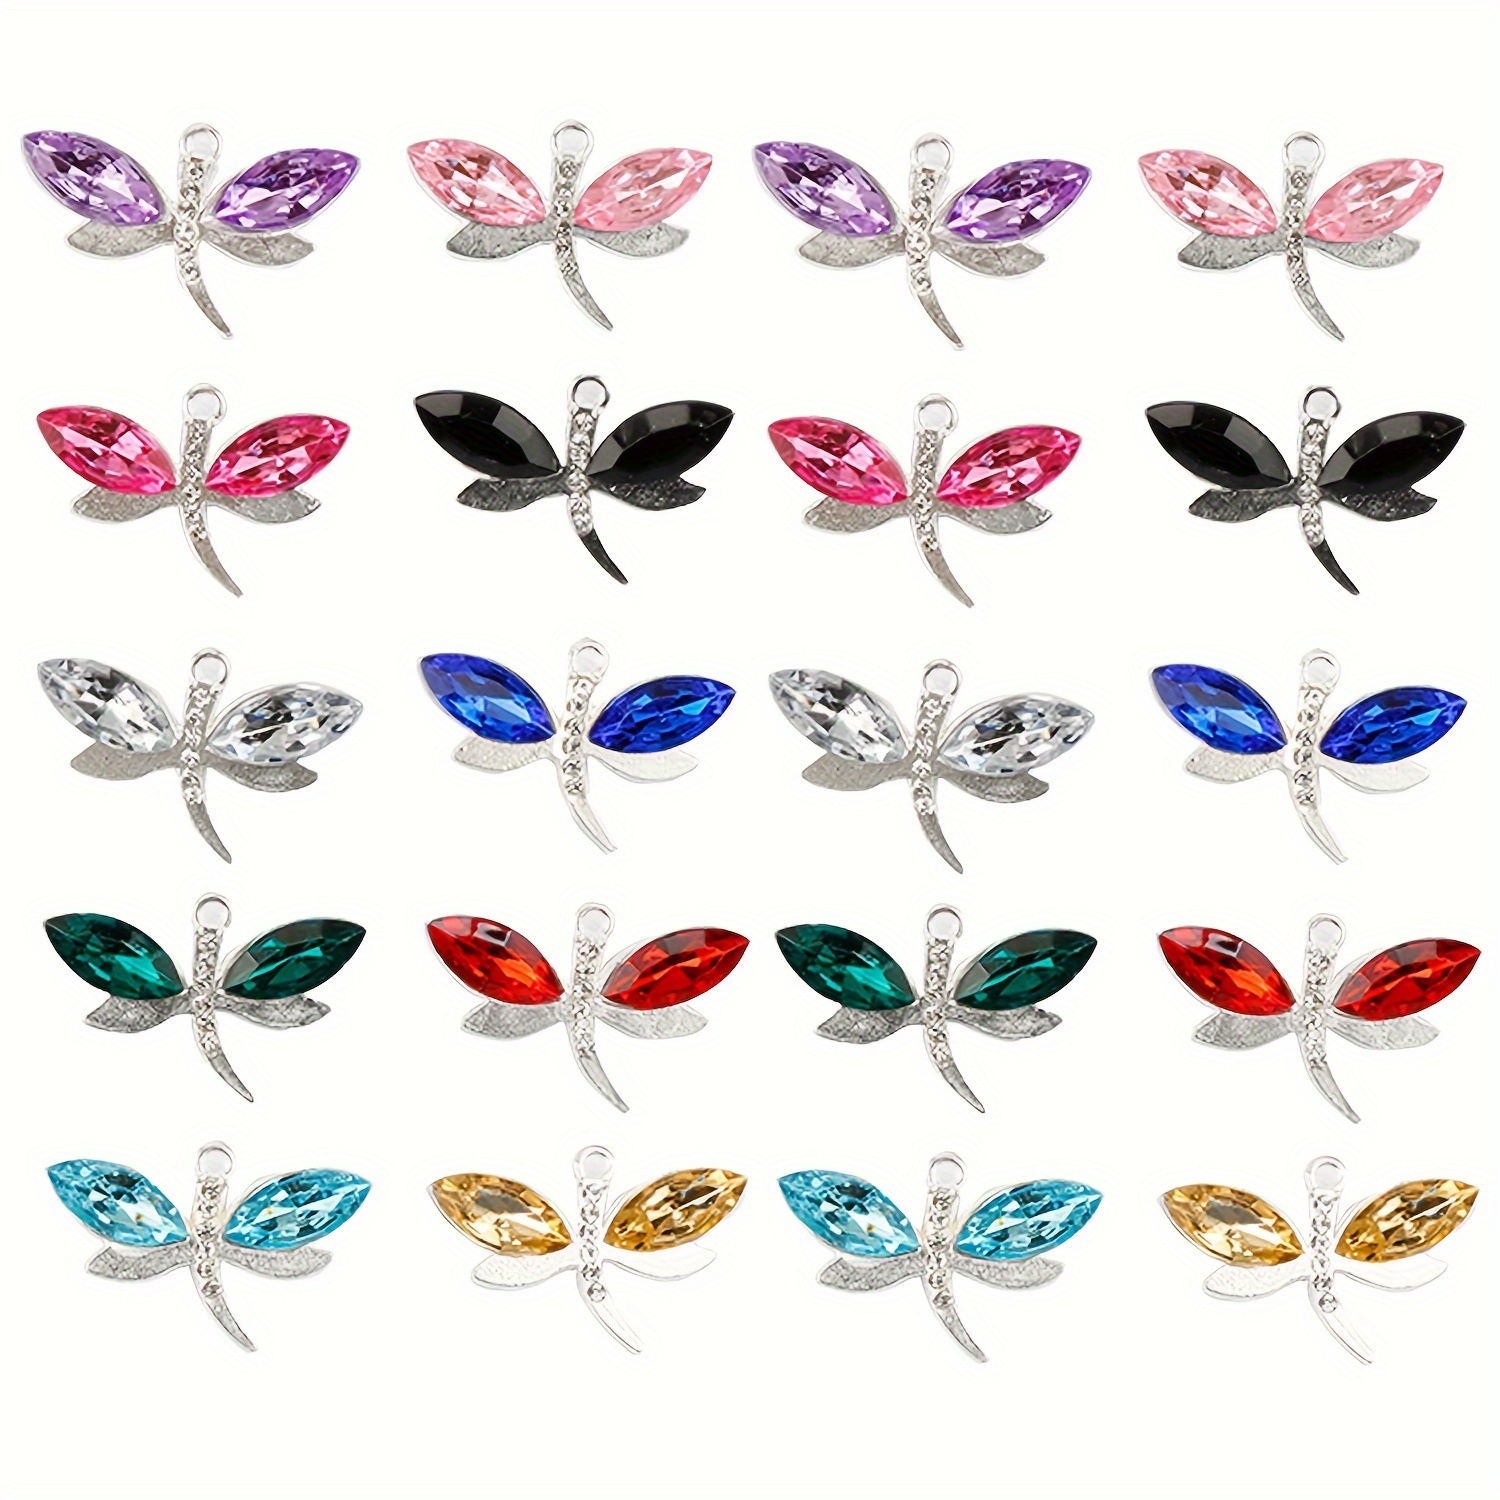 

20pcs Alloy Dragonfly Charms For Crafting - Mixed Color Insect Charms Pendants For Necklace And Bracelet Crafting Diy Jewelry Making